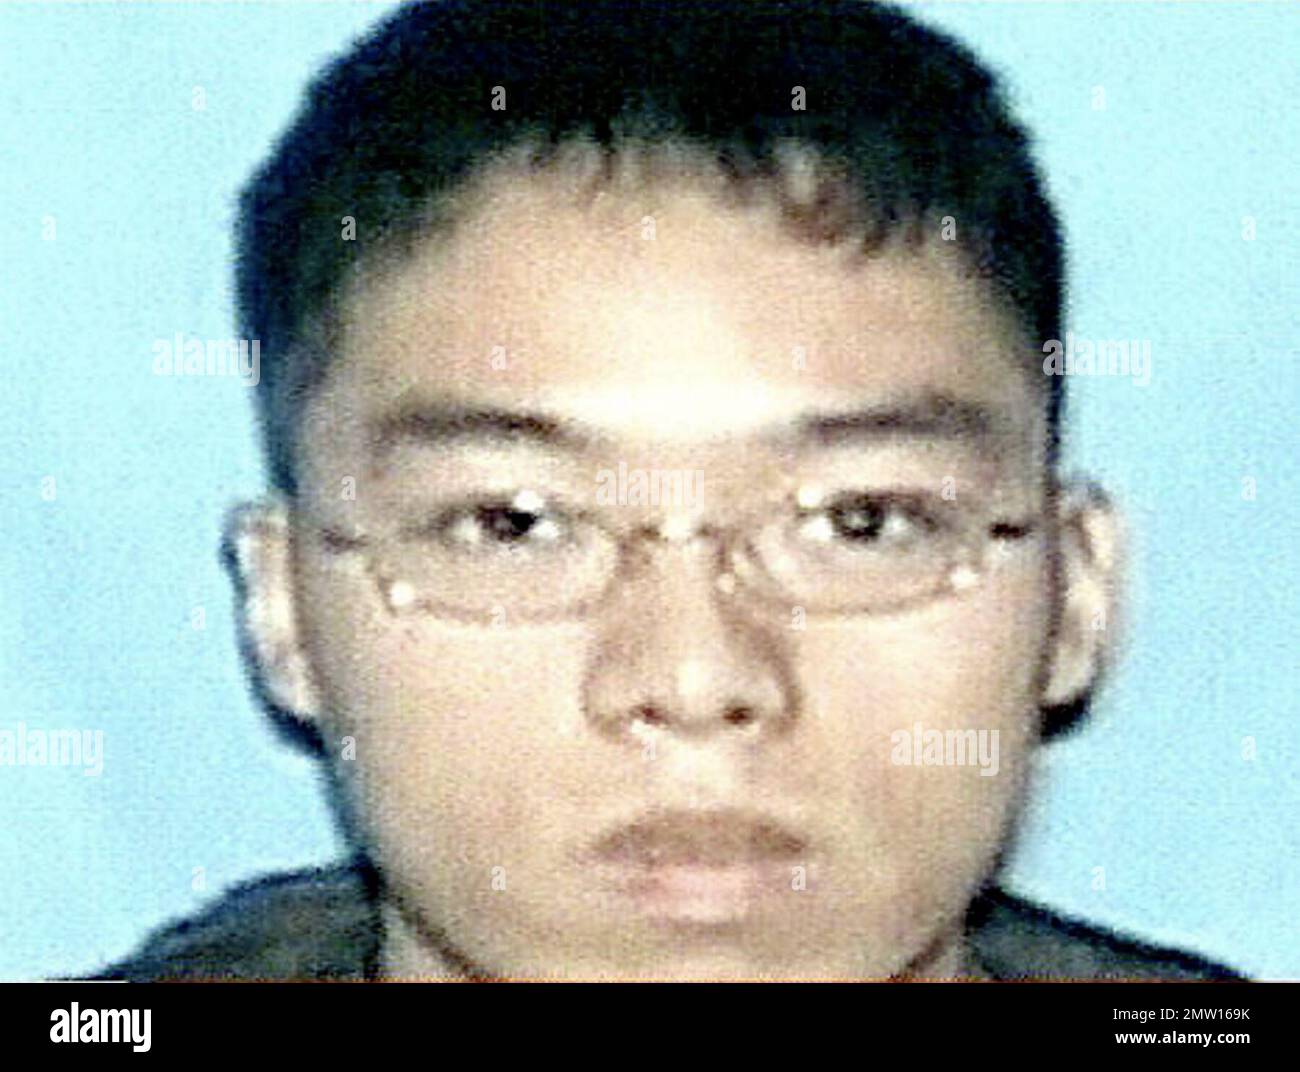 23-year old South Korean student at Virginia Tech University, Cho Seung-Hui, has been identified as the gunman responsible for the massacre at the campus yesterday that left 32 people dead. 4/17/07. Stock Photo